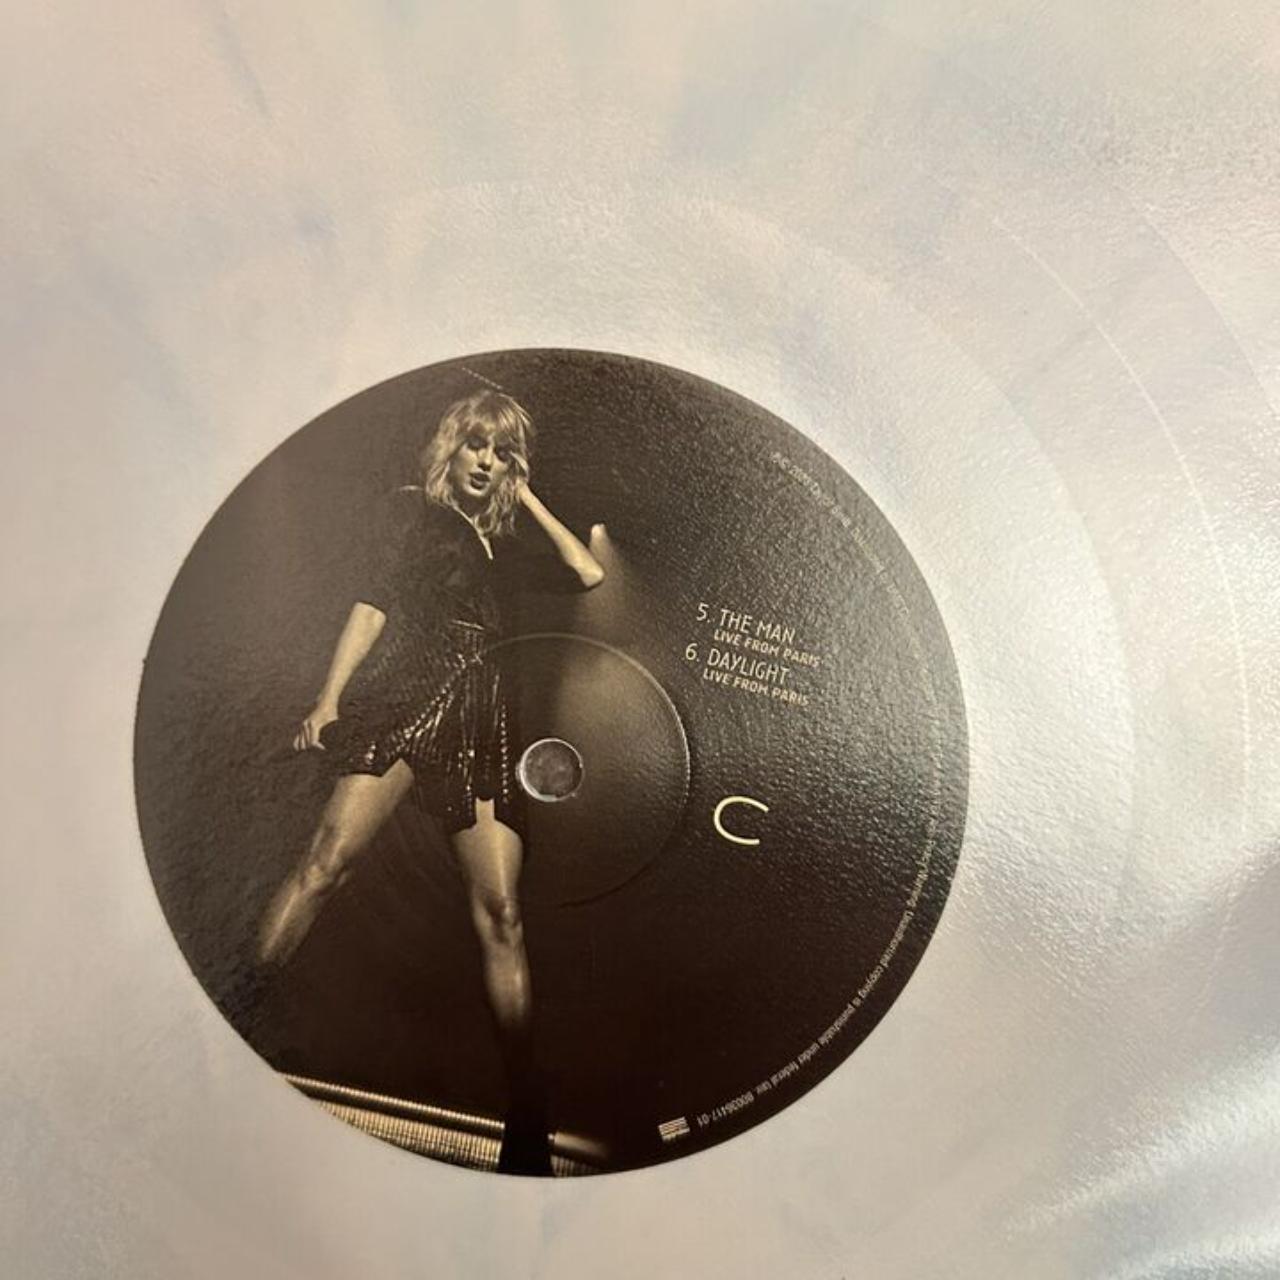 Taylor Swift's Lover record With both blue and pink - Depop